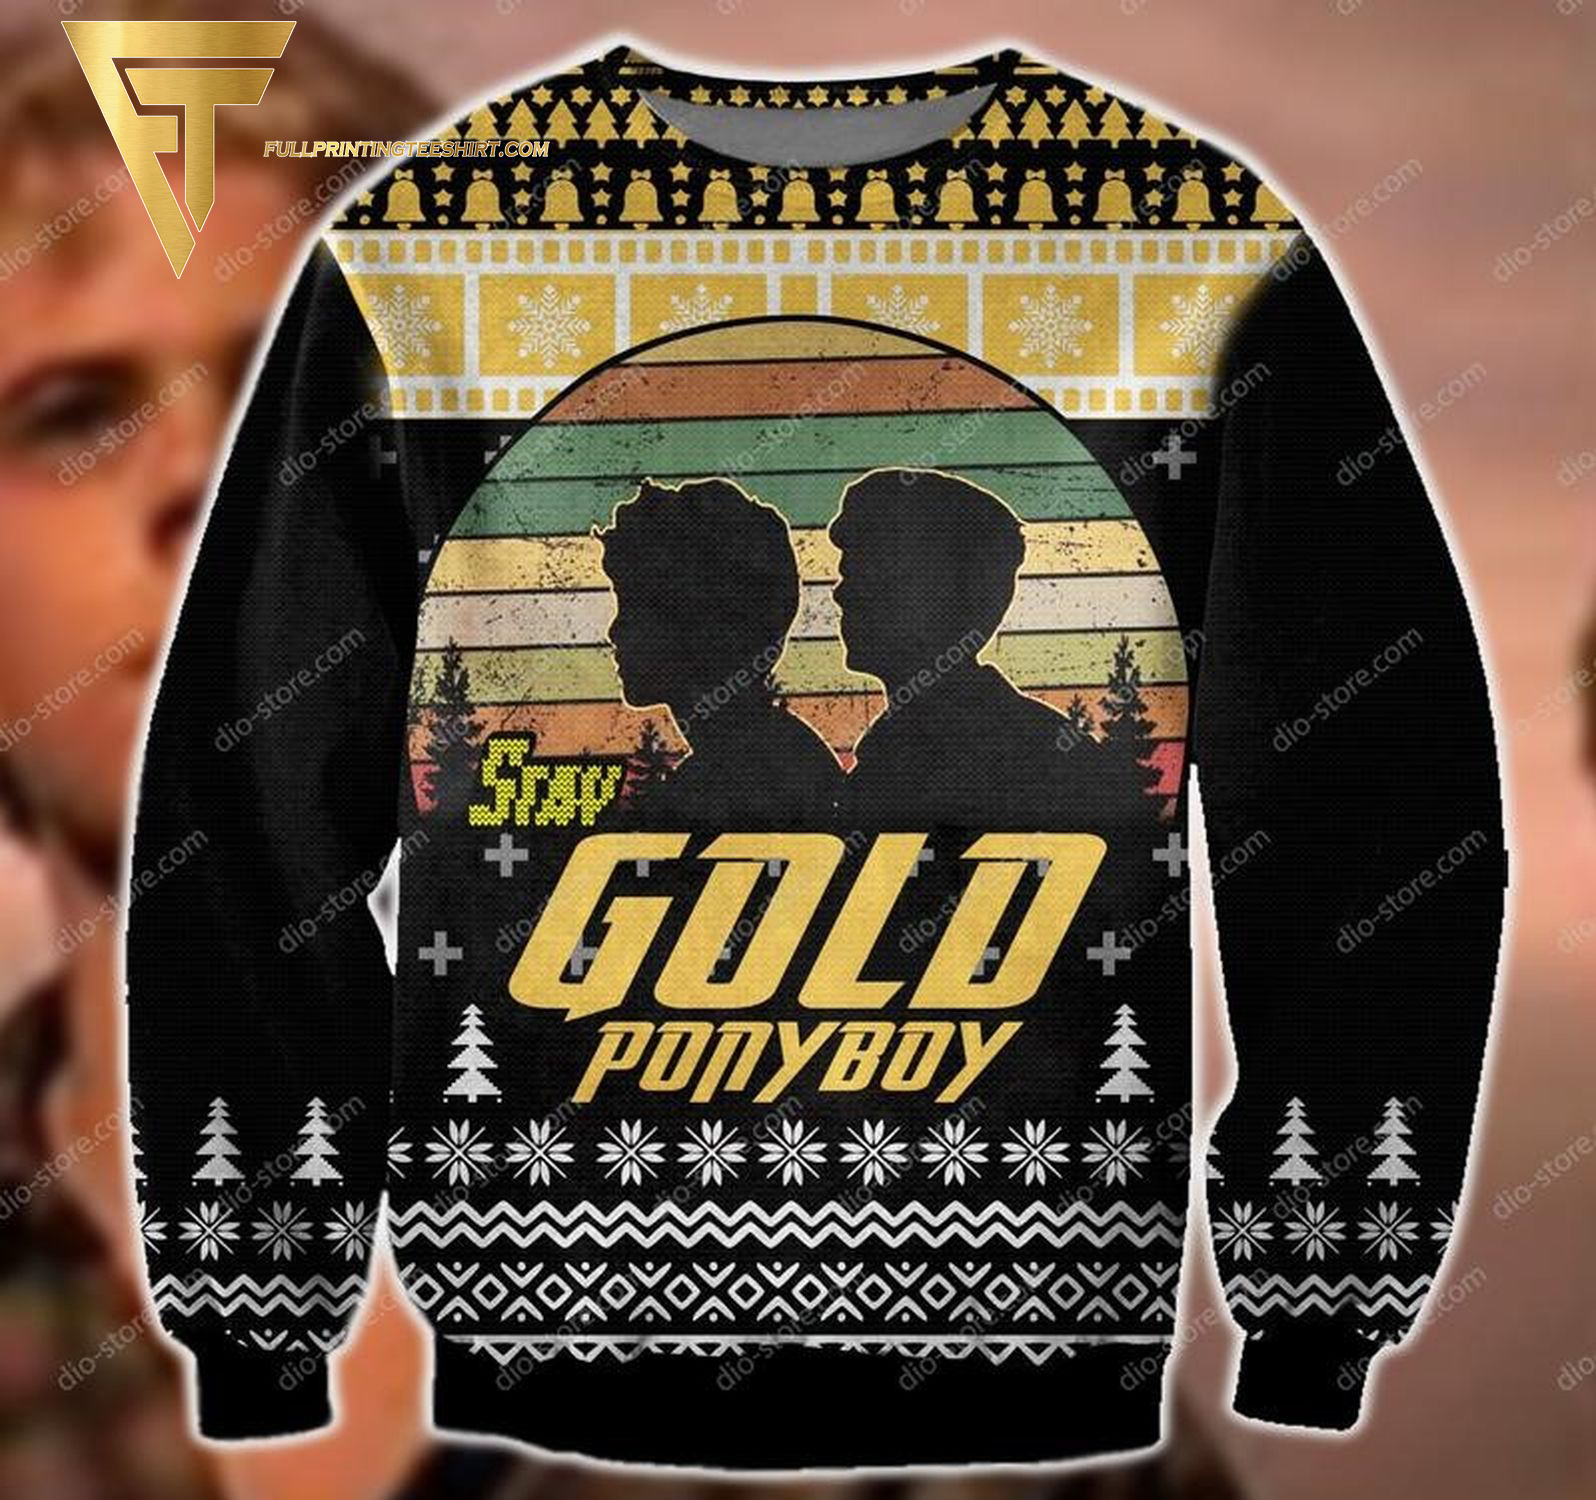 The Outsiders Stay gold Ponyboy Full Print Ugly Christmas Sweater